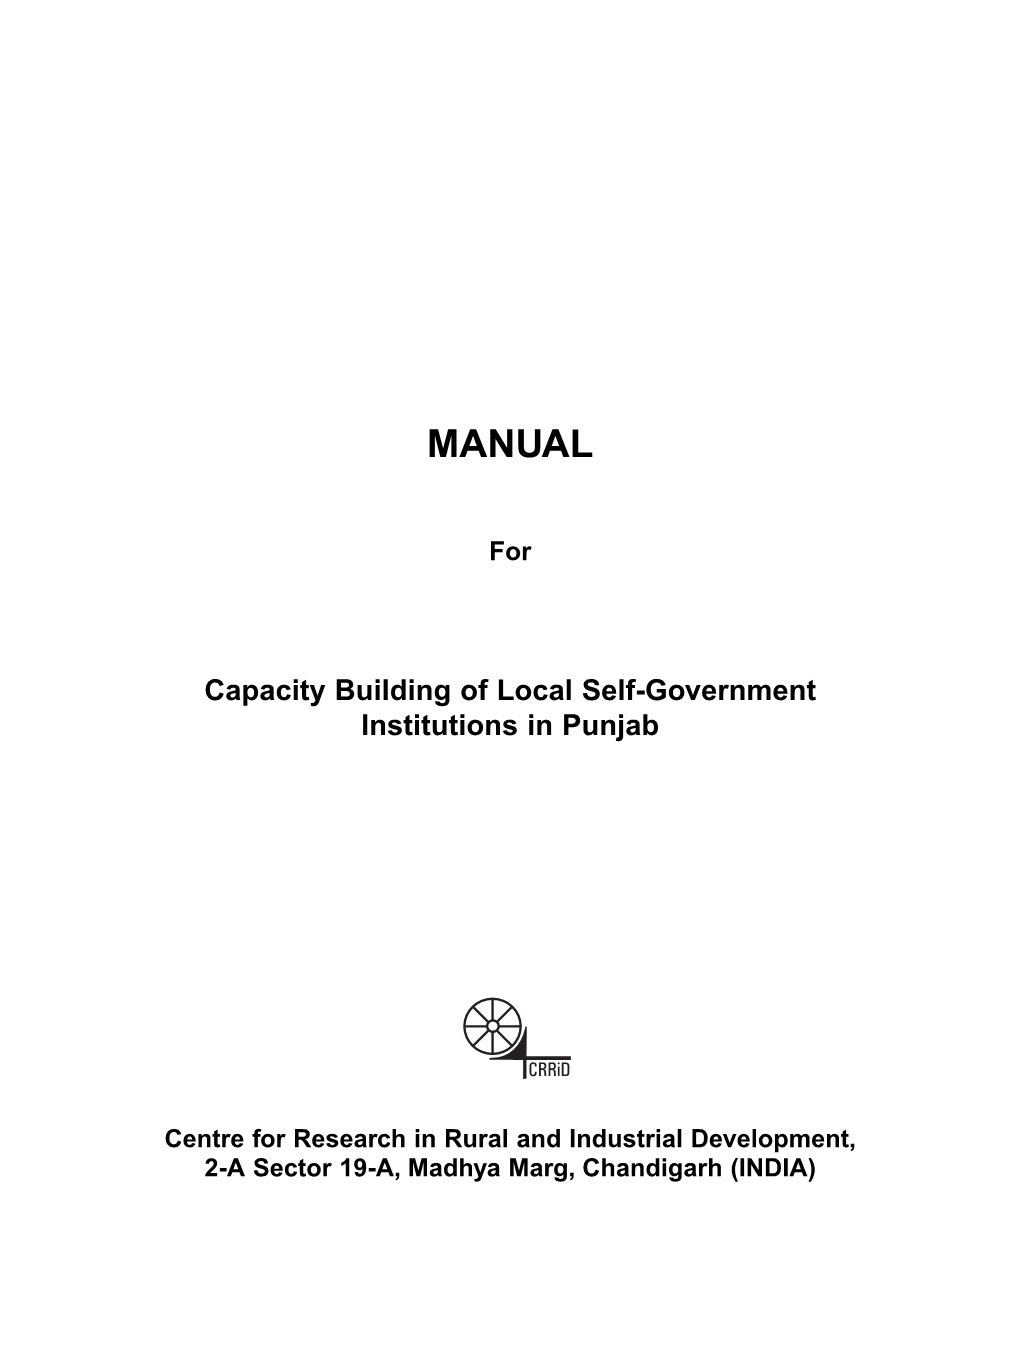 Manual for Capacity Building of Local Self Government Institutions in Punjab